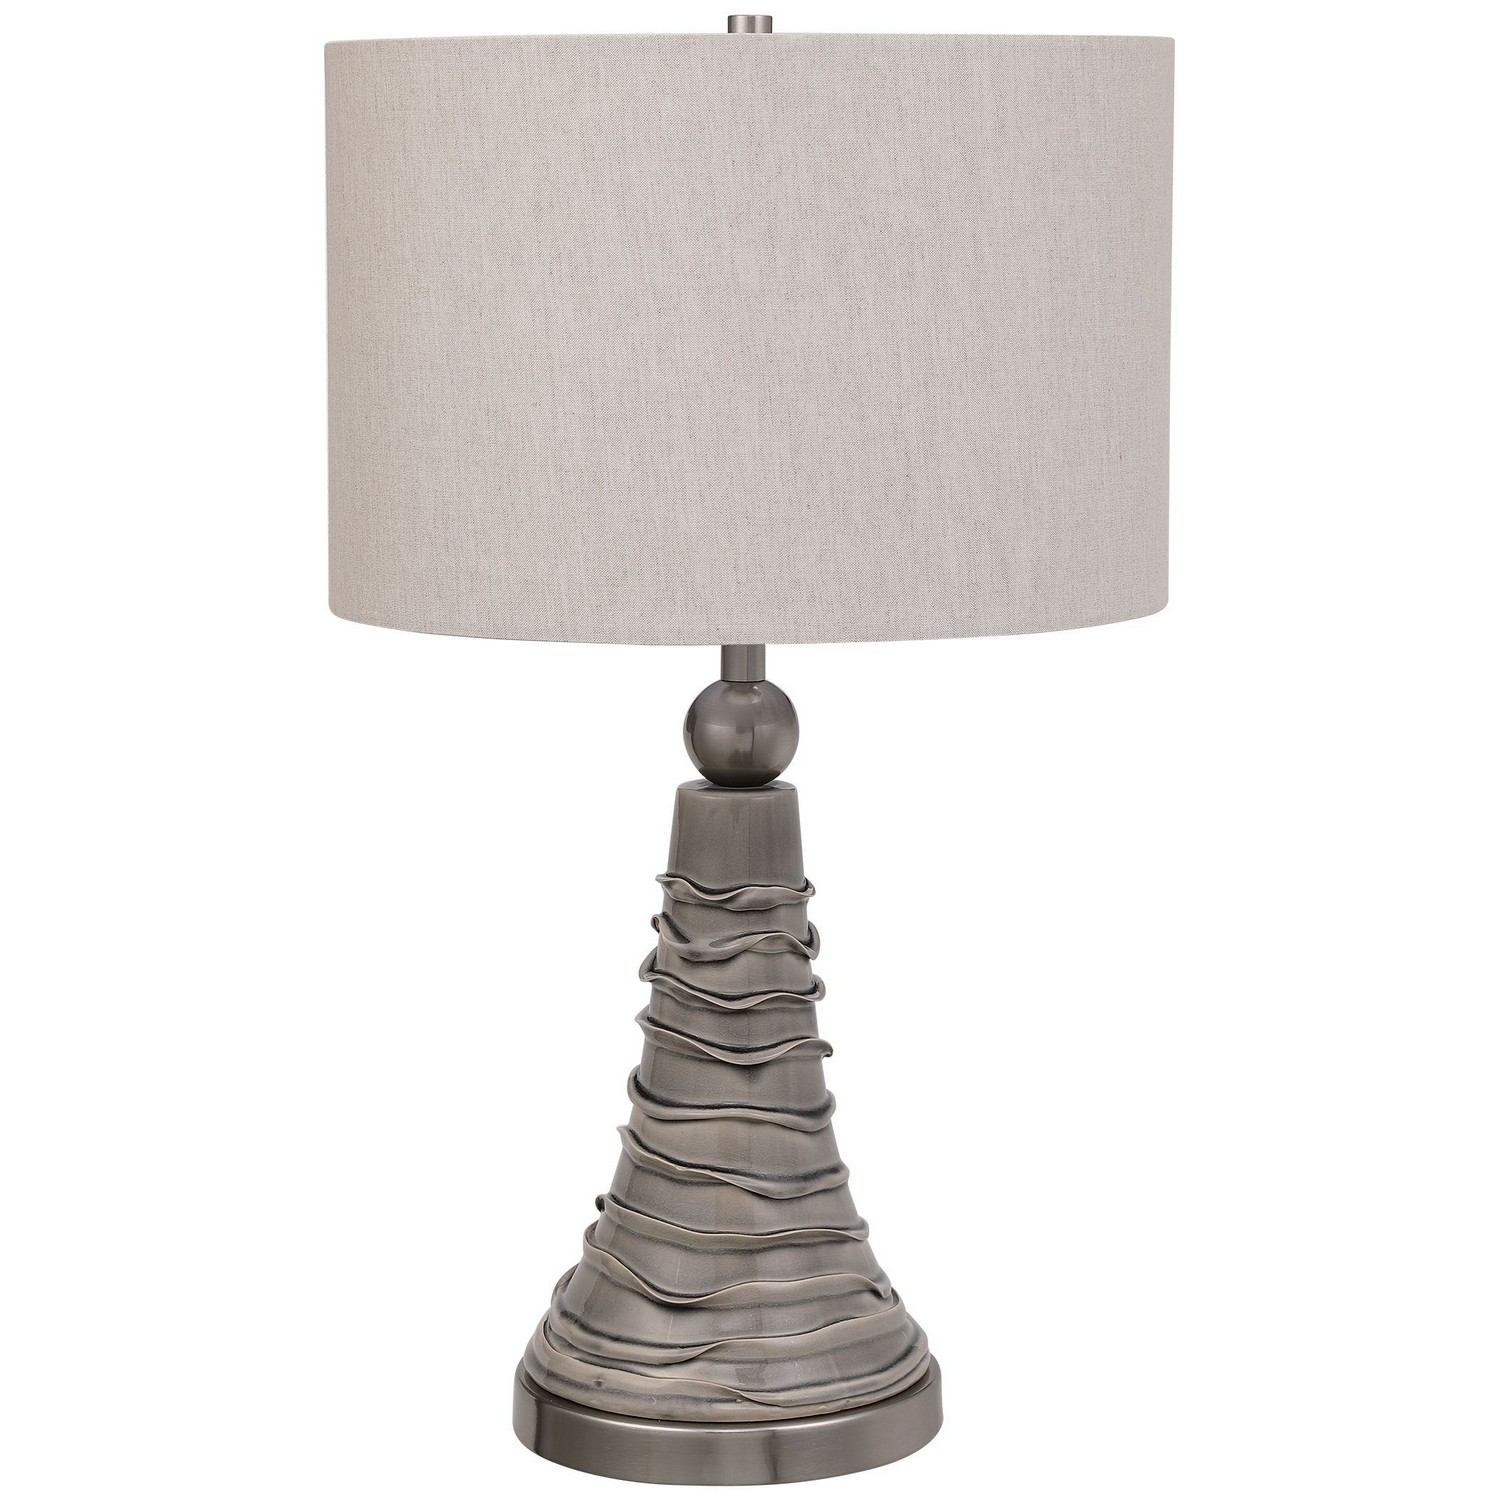 Uttermost W26073-1 Table Lamp - Dove Gray